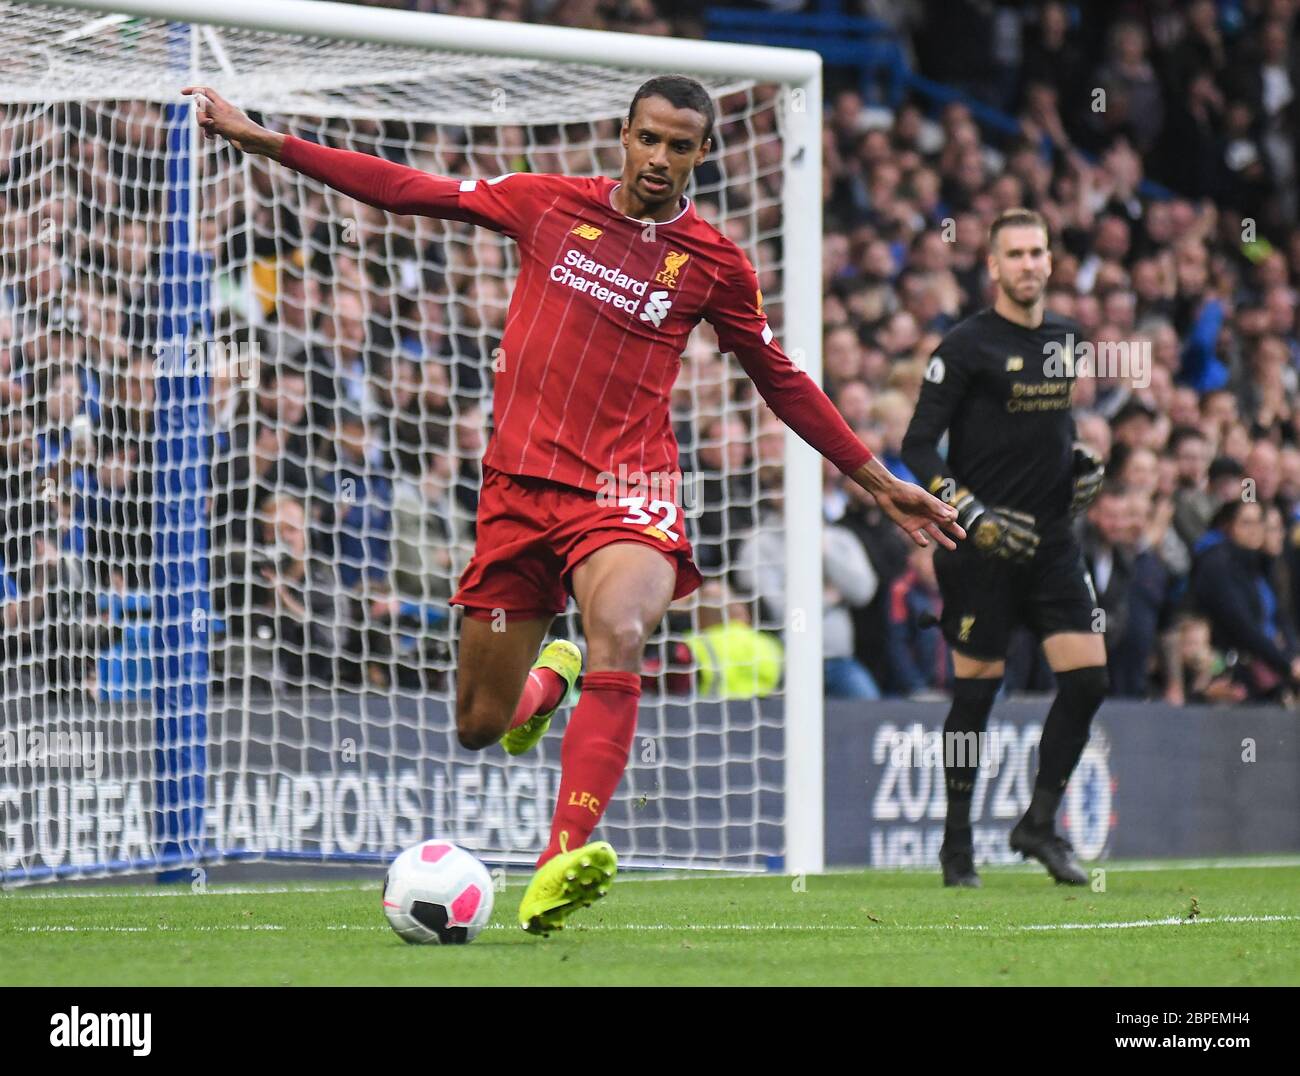 LONDON, ENGLAND - SEPTEMBER 22, 2019: Joel Matip of Liverpool pictured during the 2019/20 Premier League game between Chelsea FC and Liverpool FC at Stamford Bridge. Stock Photo